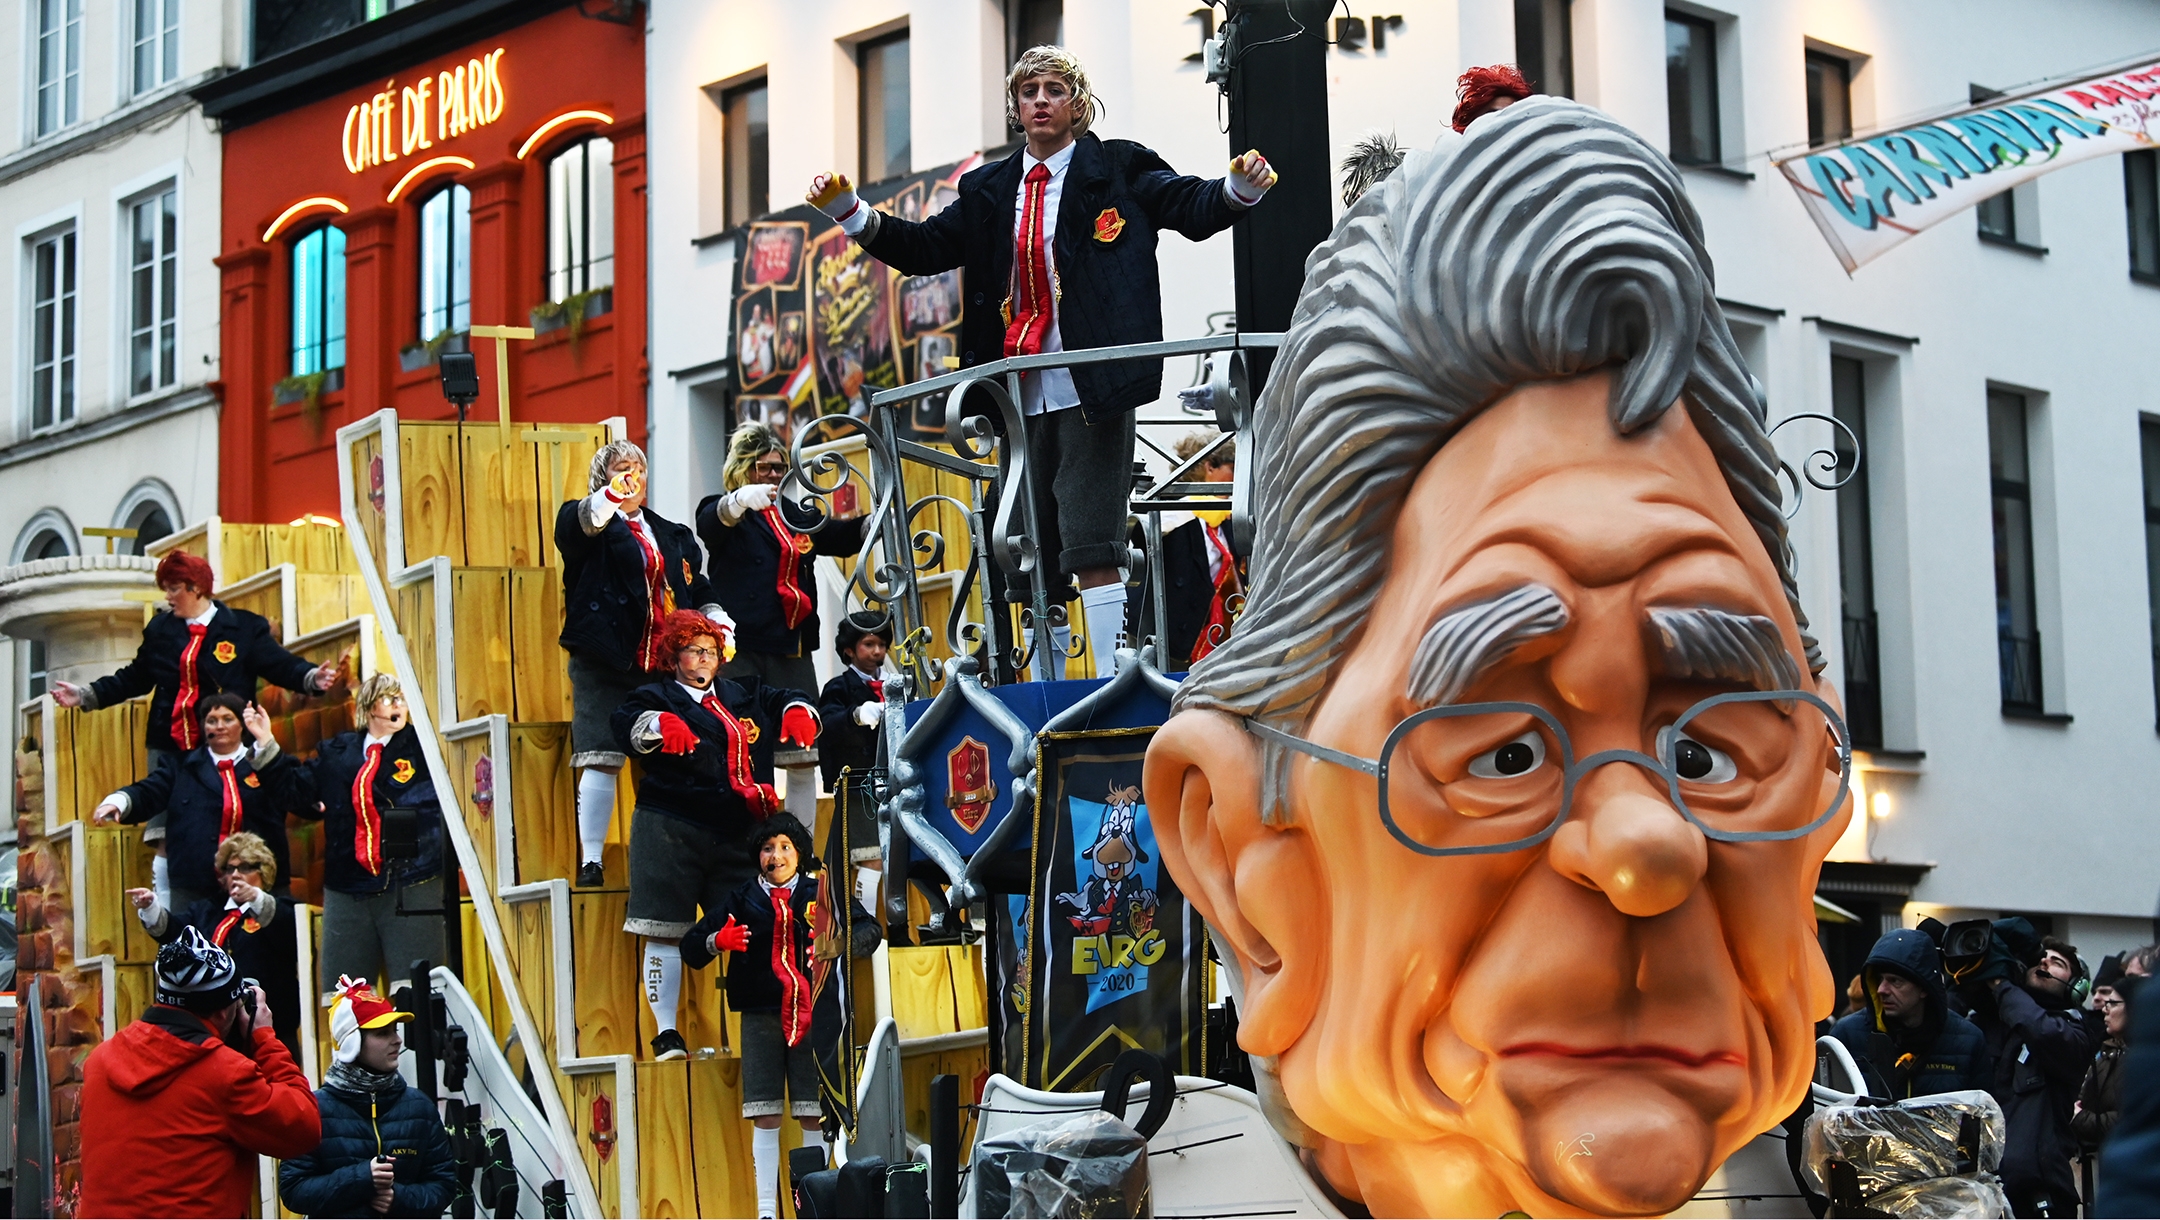 Most of the floats have no racist overtones at the annual carnival in Aalst, Belgium, including this one pictures there on Feb. 23, 2020. (Cnaan Liphshiz)